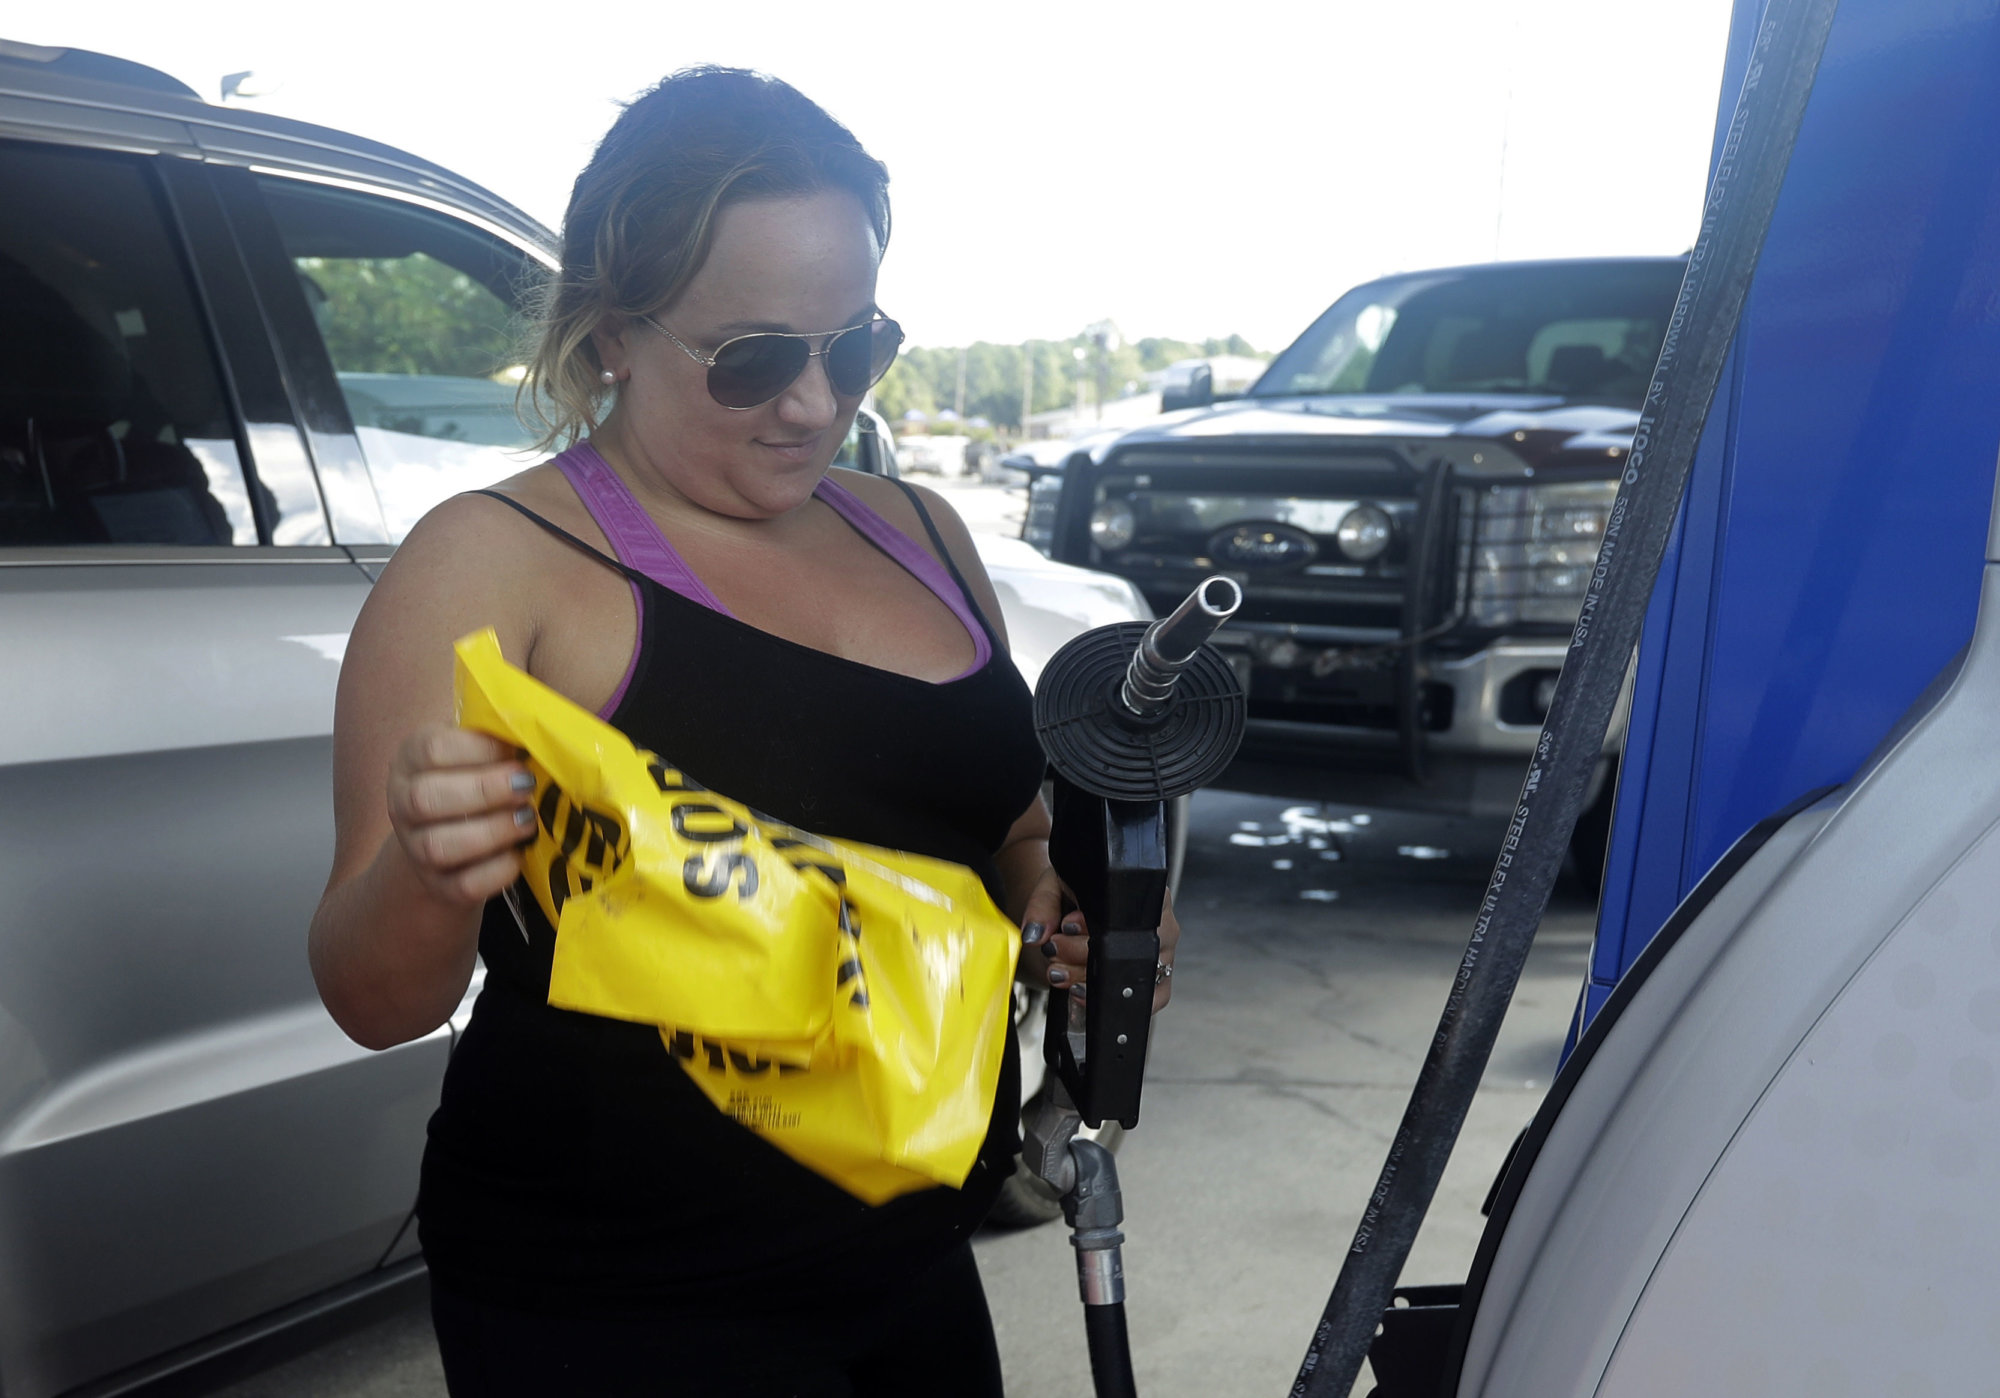 Sarah Dankanich, right, removes an "out of service" wrapper from a gas pump as her husband prepares to pump gas in cans in advance of Hurricane Florence in Wilmington, N.C., Wednesday, Sept. 12, 2018. Florence exploded into a potentially catastrophic hurricane Monday as it closed in on North and South Carolina, carrying winds up to 140 mph (220 kph) and water that could wreak havoc over a wide stretch of the eastern United States later this week. (AP Photo/Chuck Burton)